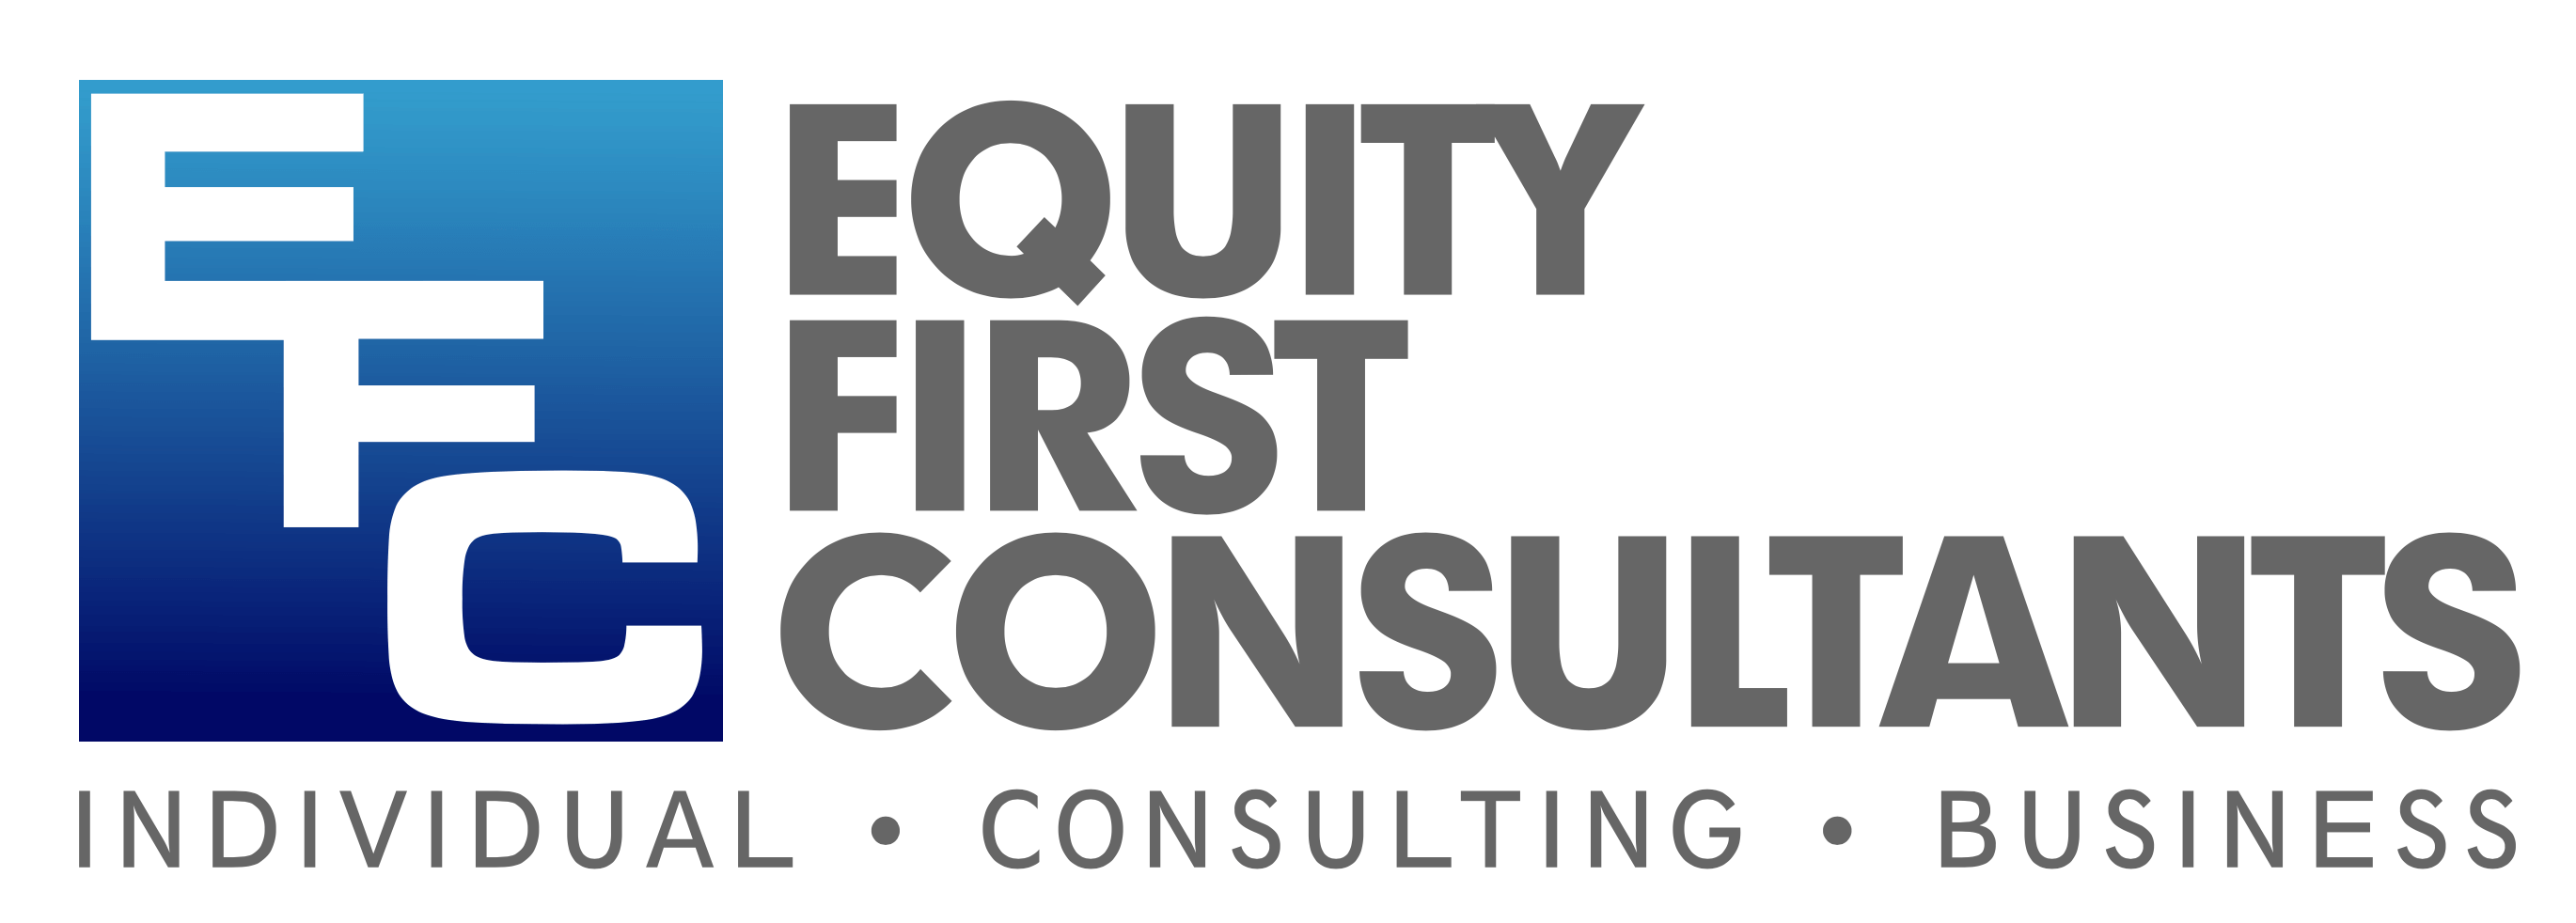 Equity First Consultants